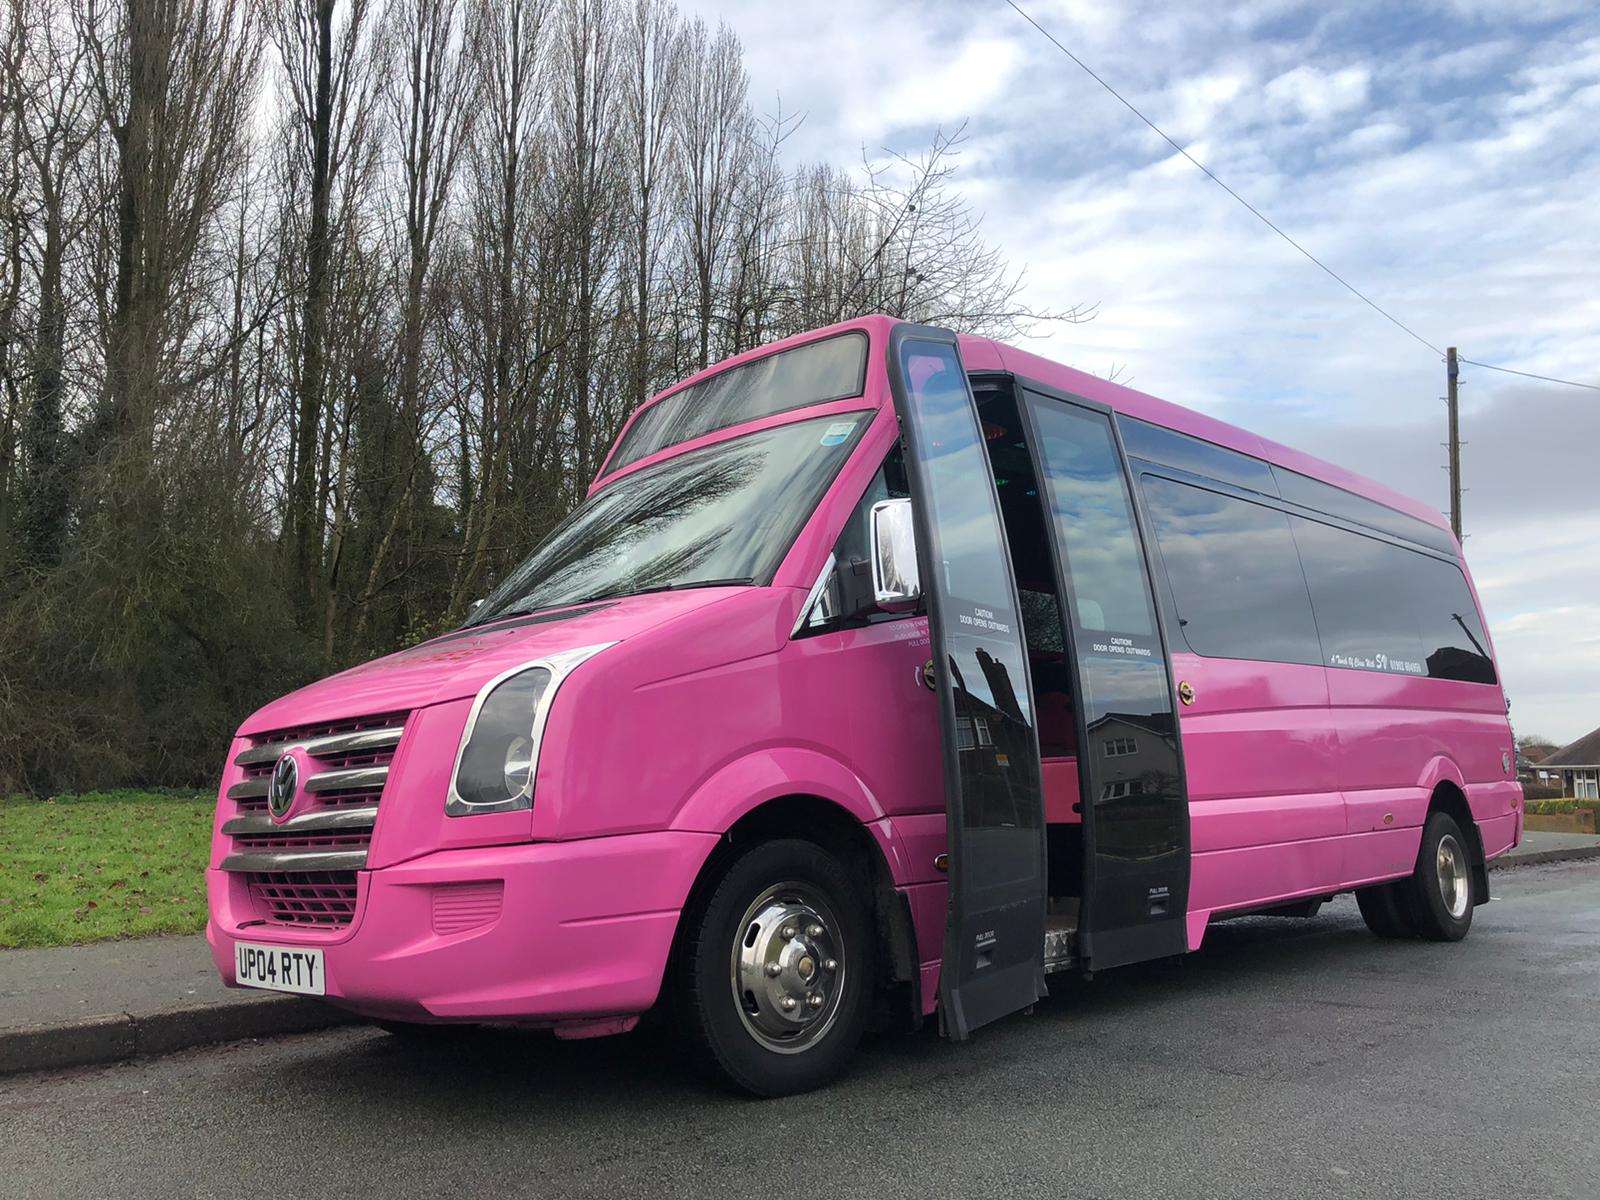 How to Plan the Perfect Group Night Out with a UK Party Bus